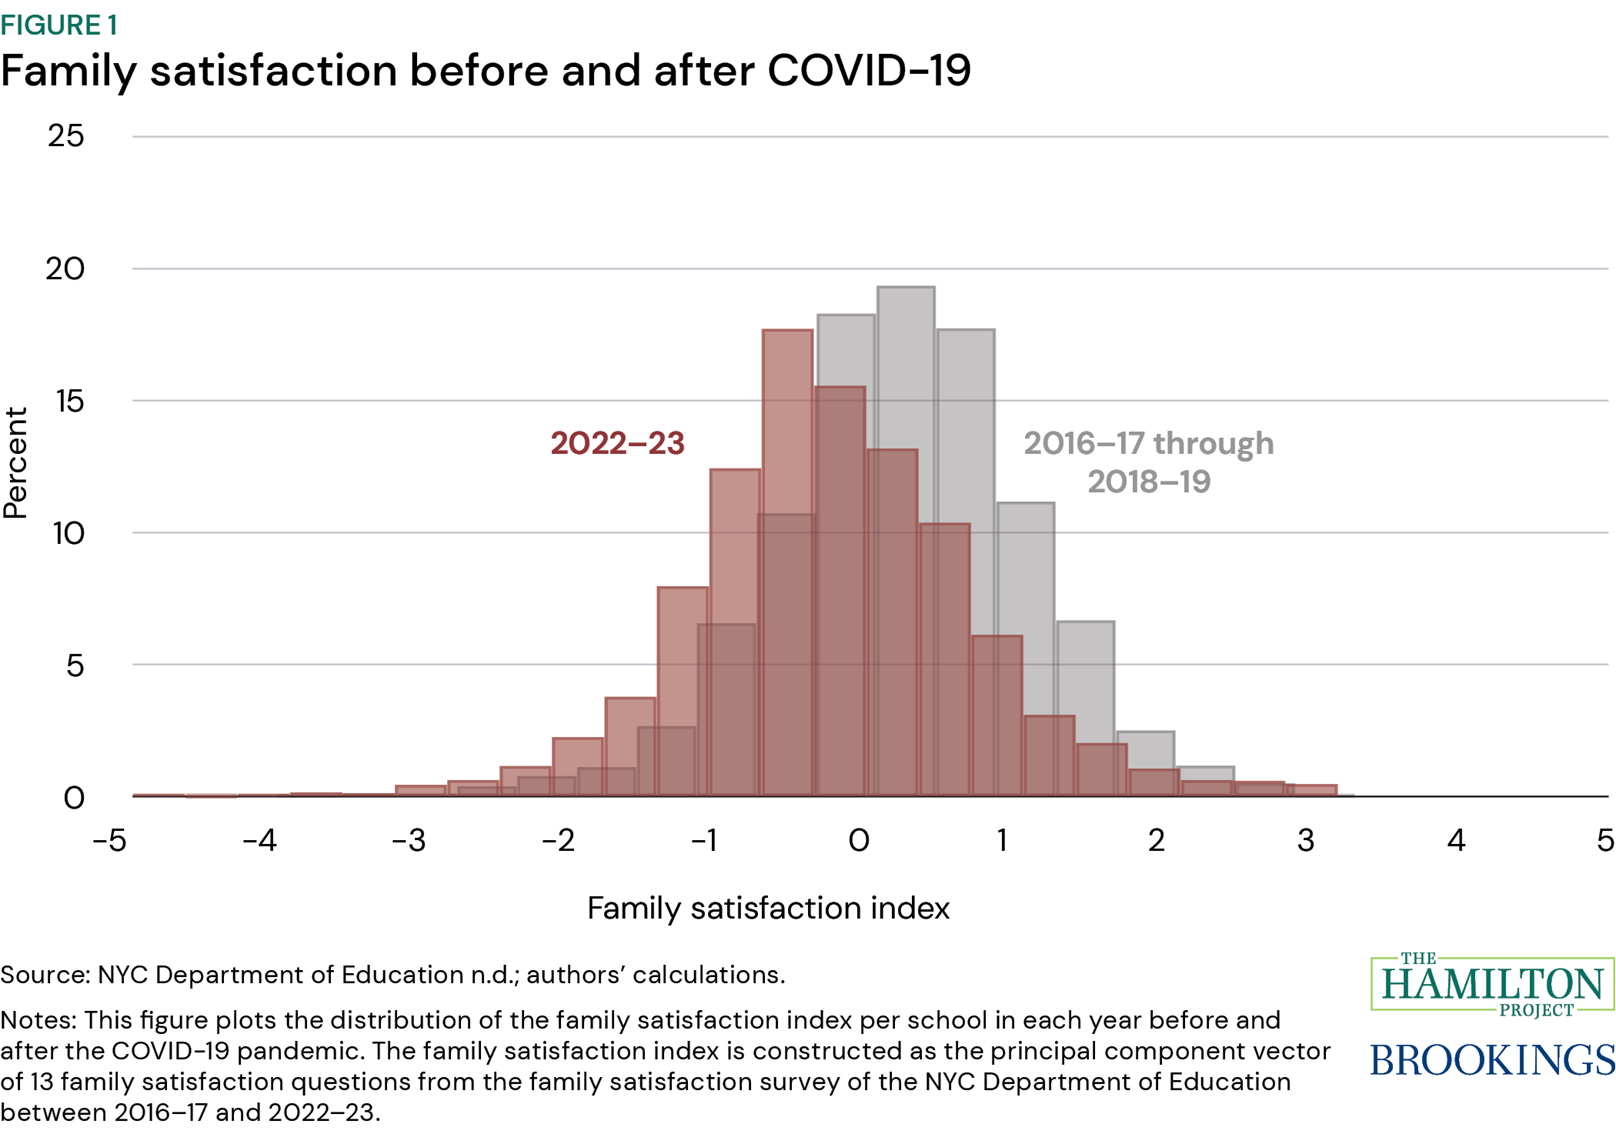 Figure 1: Family satisfaction before and after COVID-19 from the NYC Department of Education, plotting the distribution of family satisfaction index per school before and after the pandemic